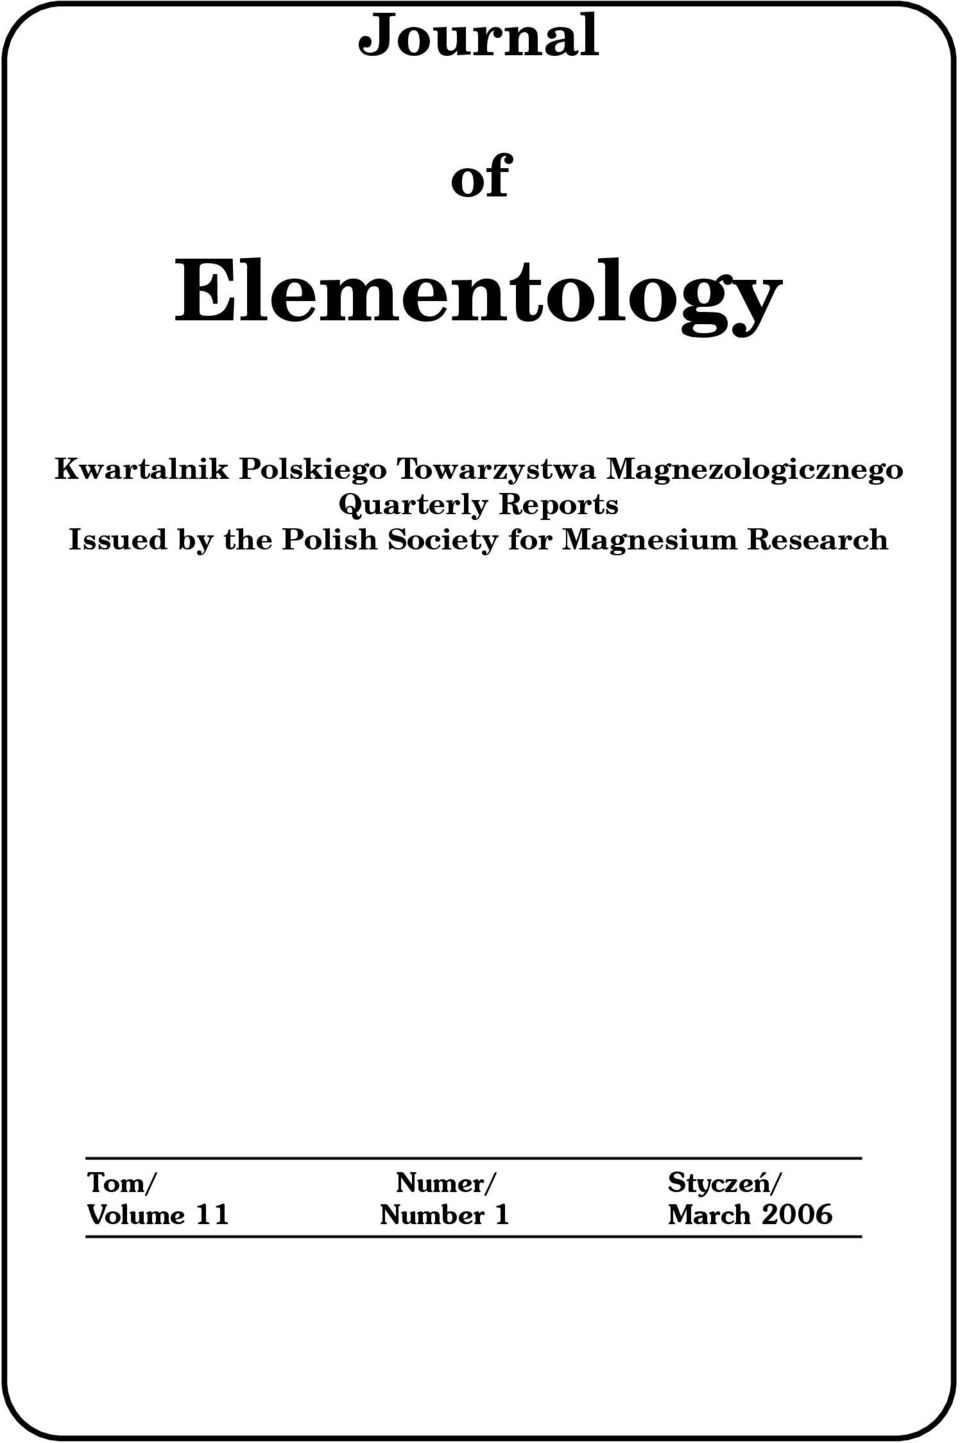 Issued by the Polish Society for Magnesium